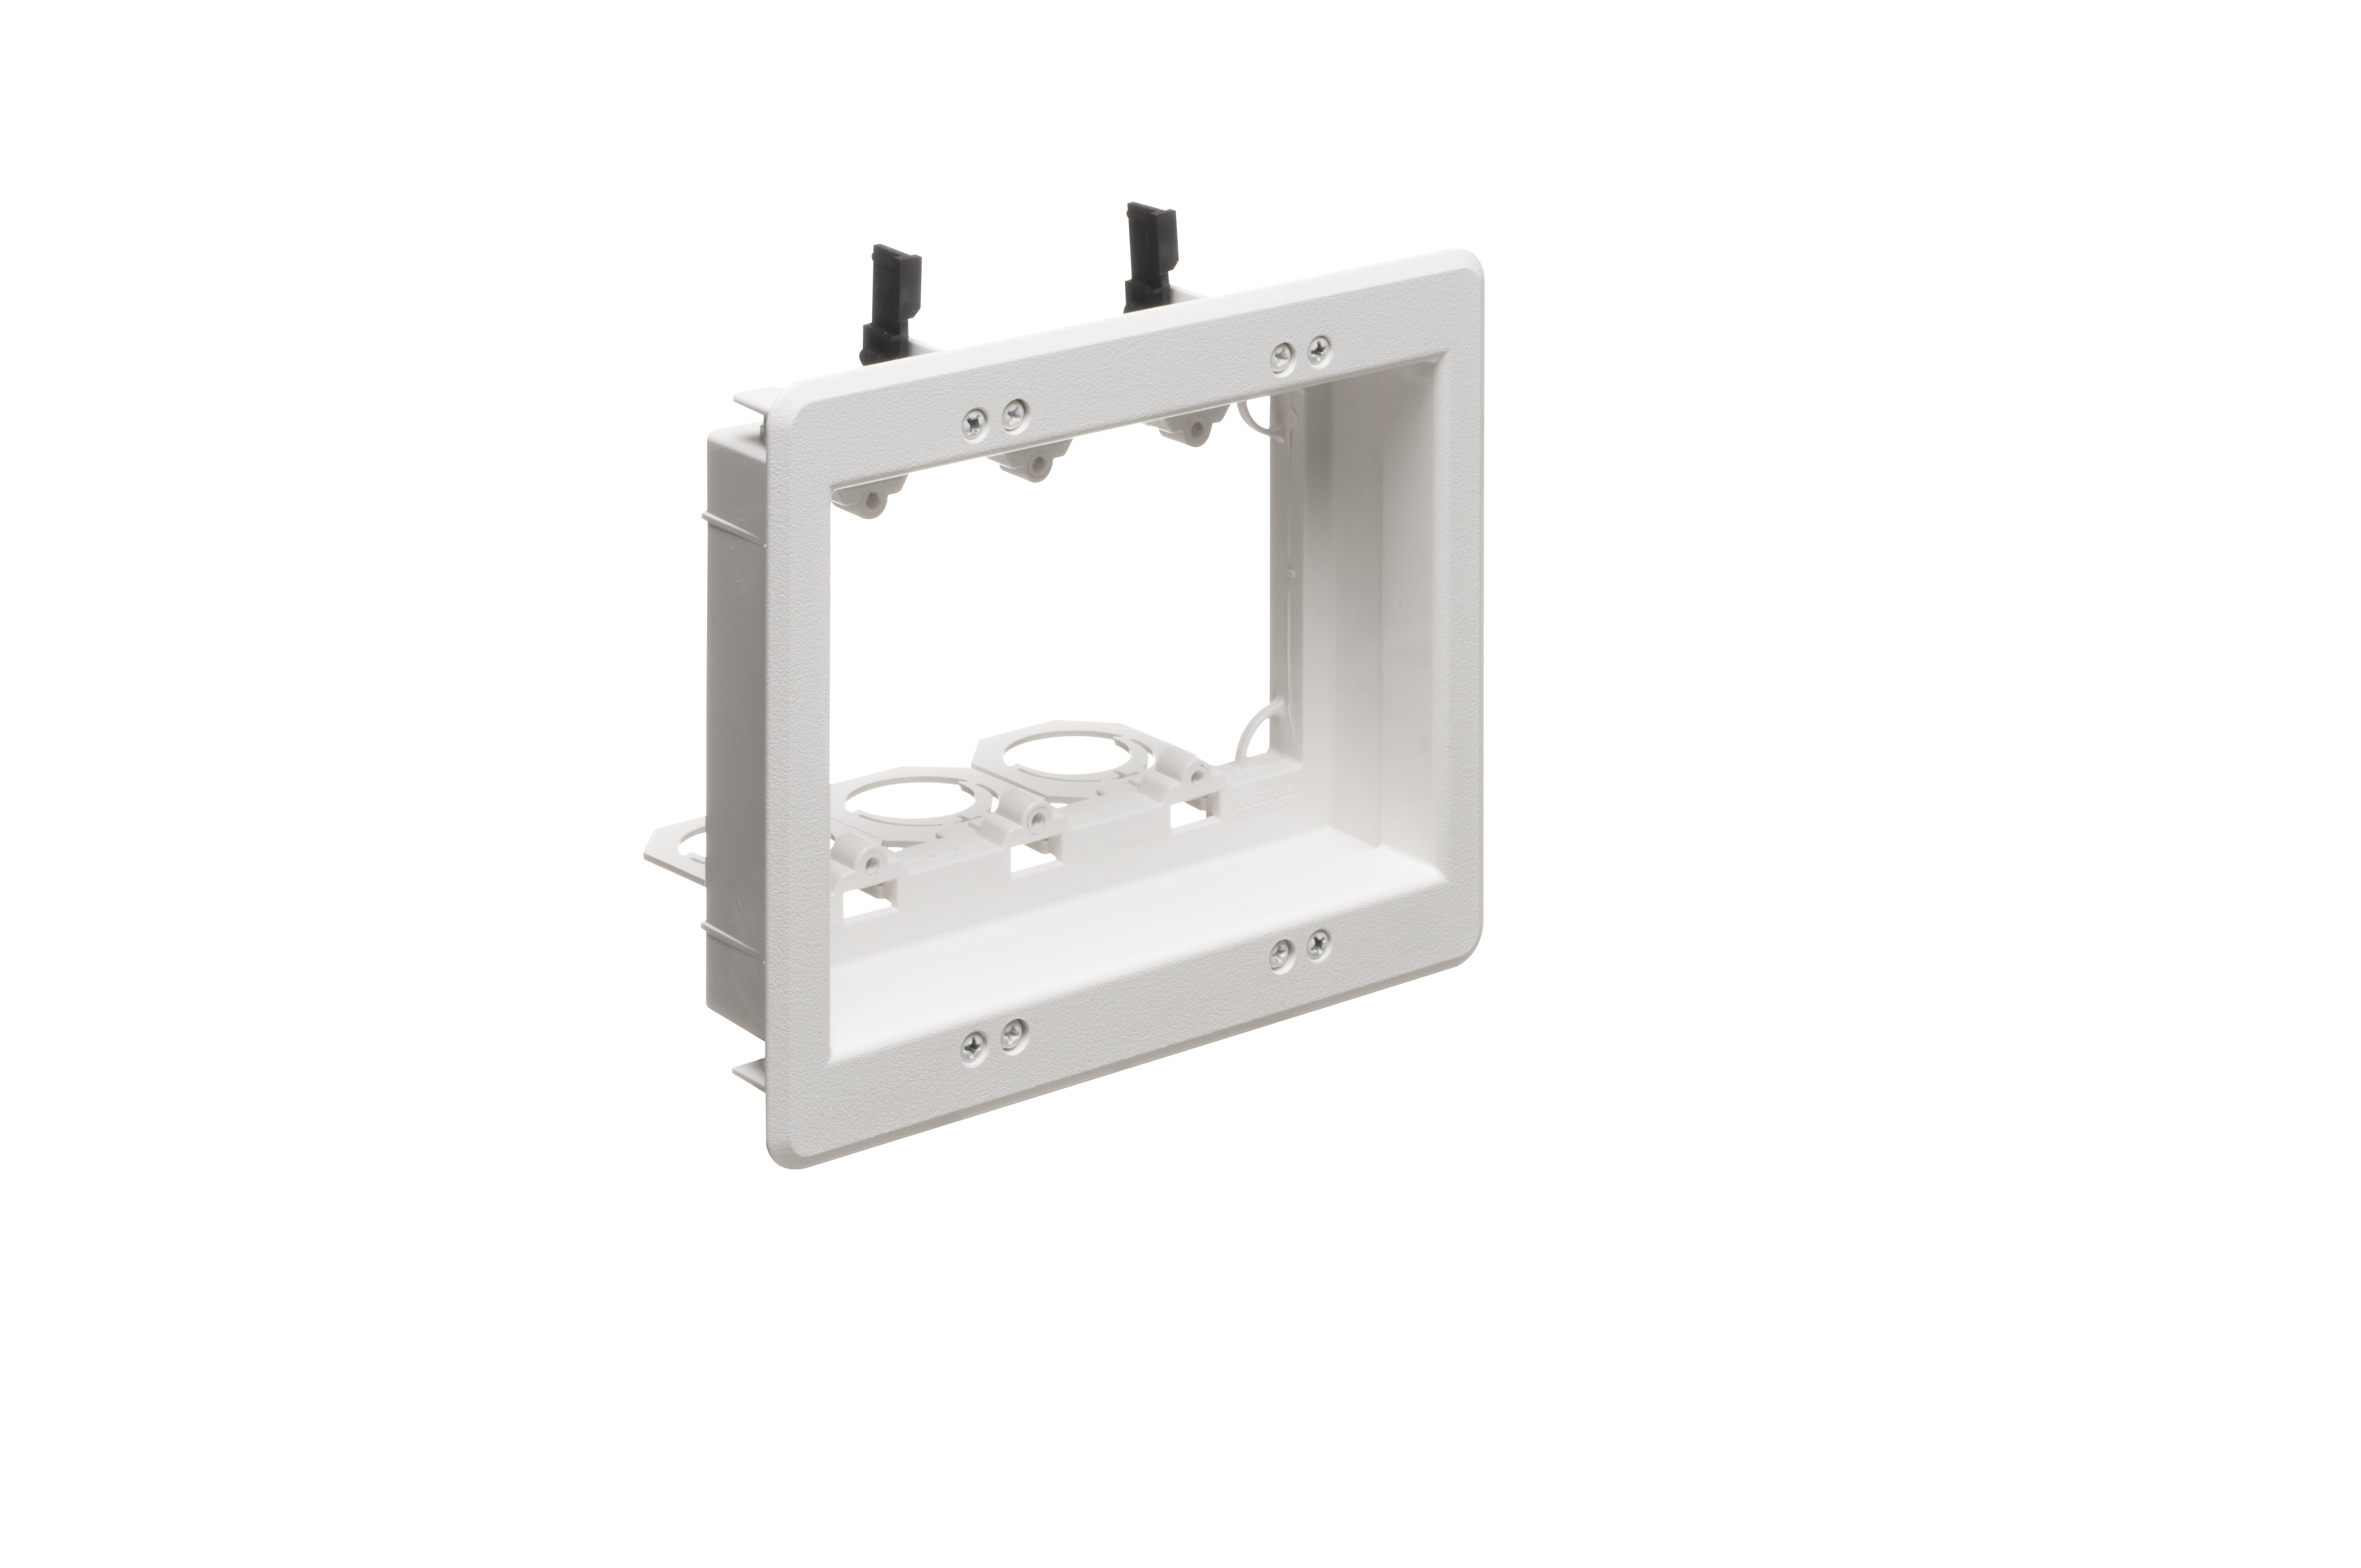 Recessed low voltage mounting bracket for old or new construction. Designed to install low voltage class 2 wiring only. White Paintable. Three Gang.